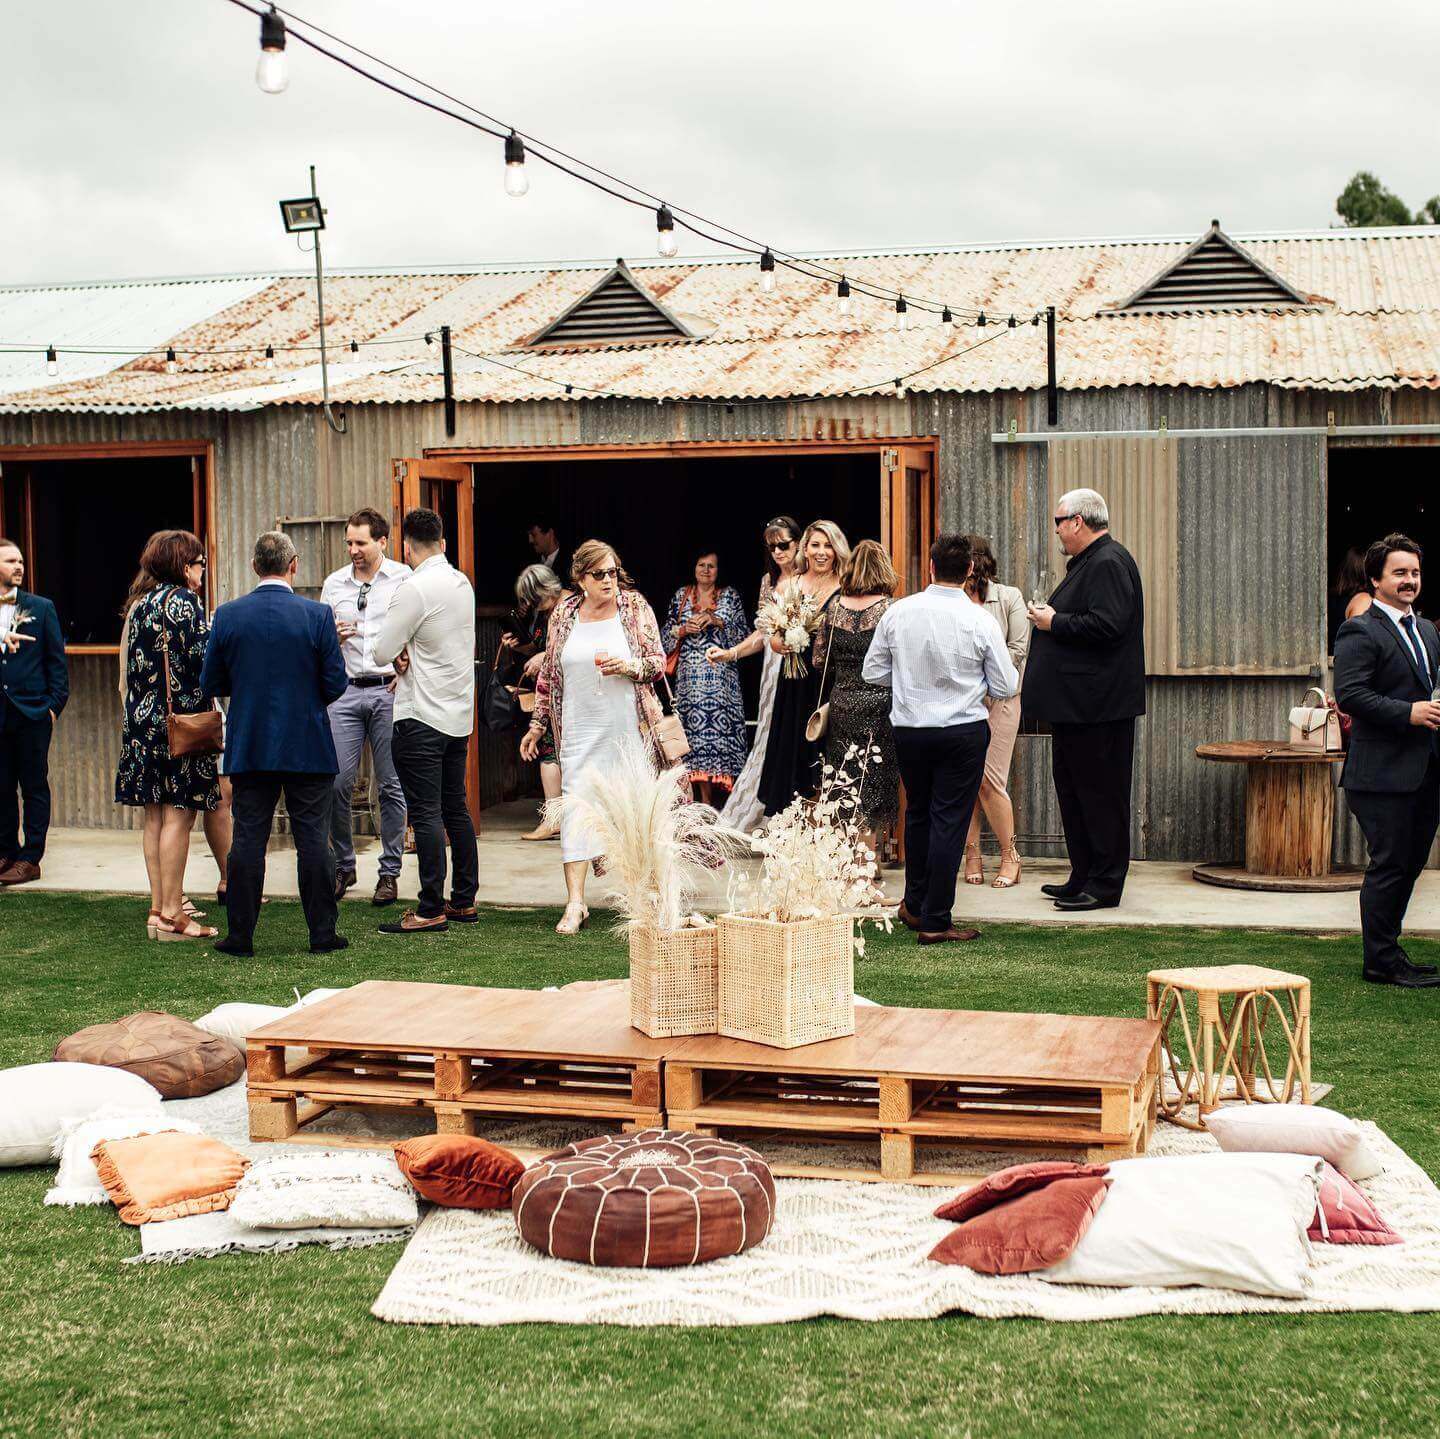 Best-rustic-country-wedding-venues-in-Australia-Woodburn-Homestead-South-Australia- @therawphoto